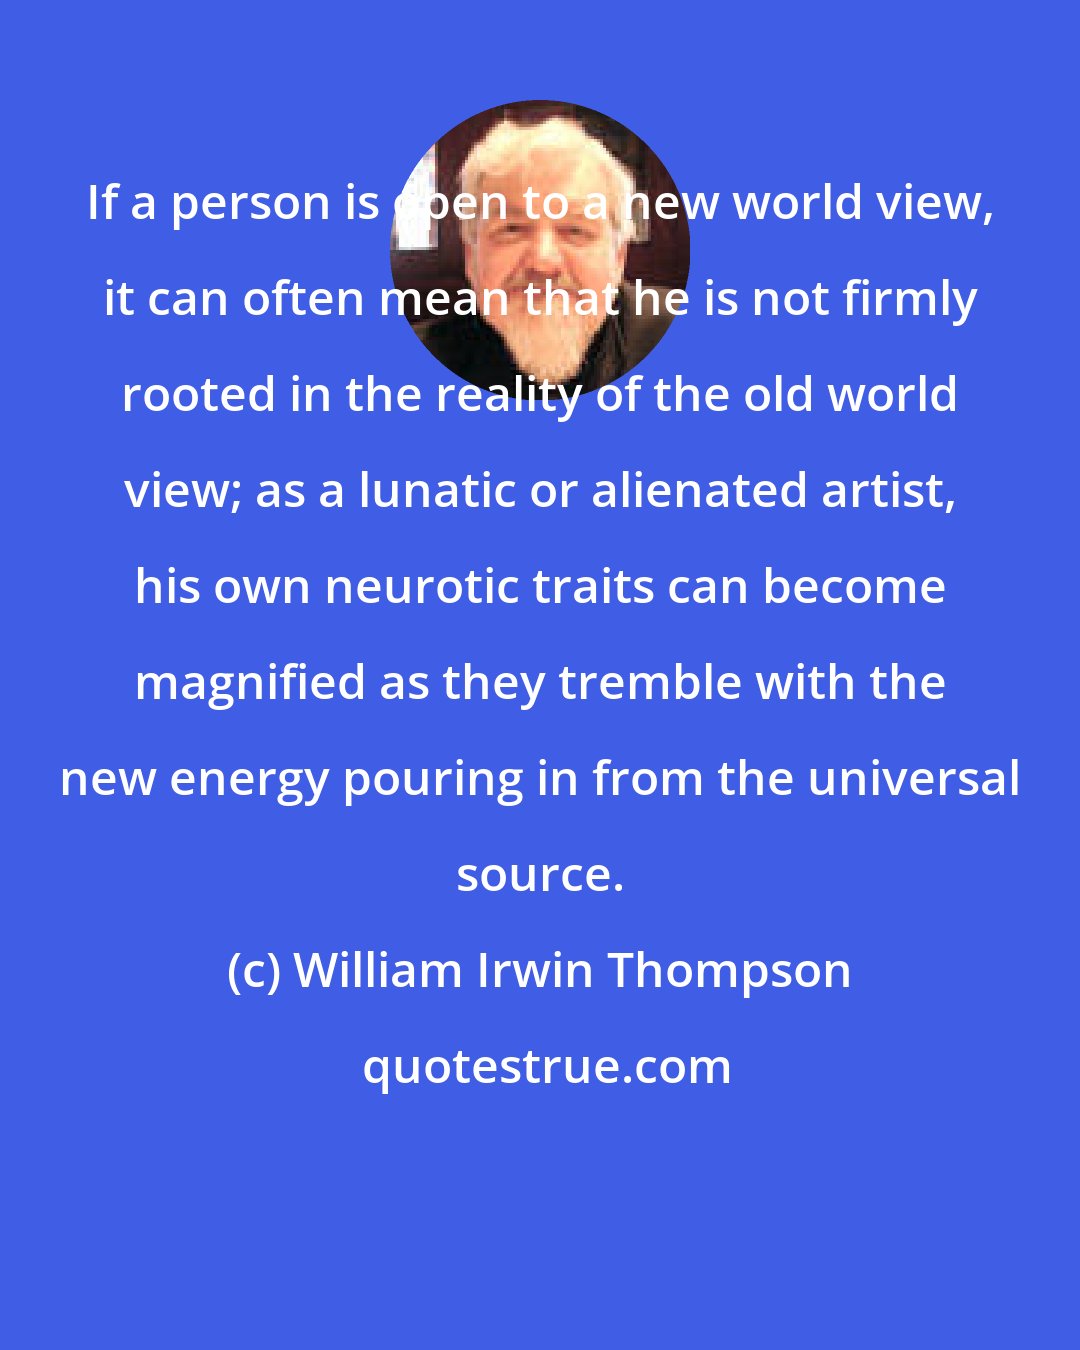 William Irwin Thompson: If a person is open to a new world view, it can often mean that he is not firmly rooted in the reality of the old world view; as a lunatic or alienated artist, his own neurotic traits can become magnified as they tremble with the new energy pouring in from the universal source.